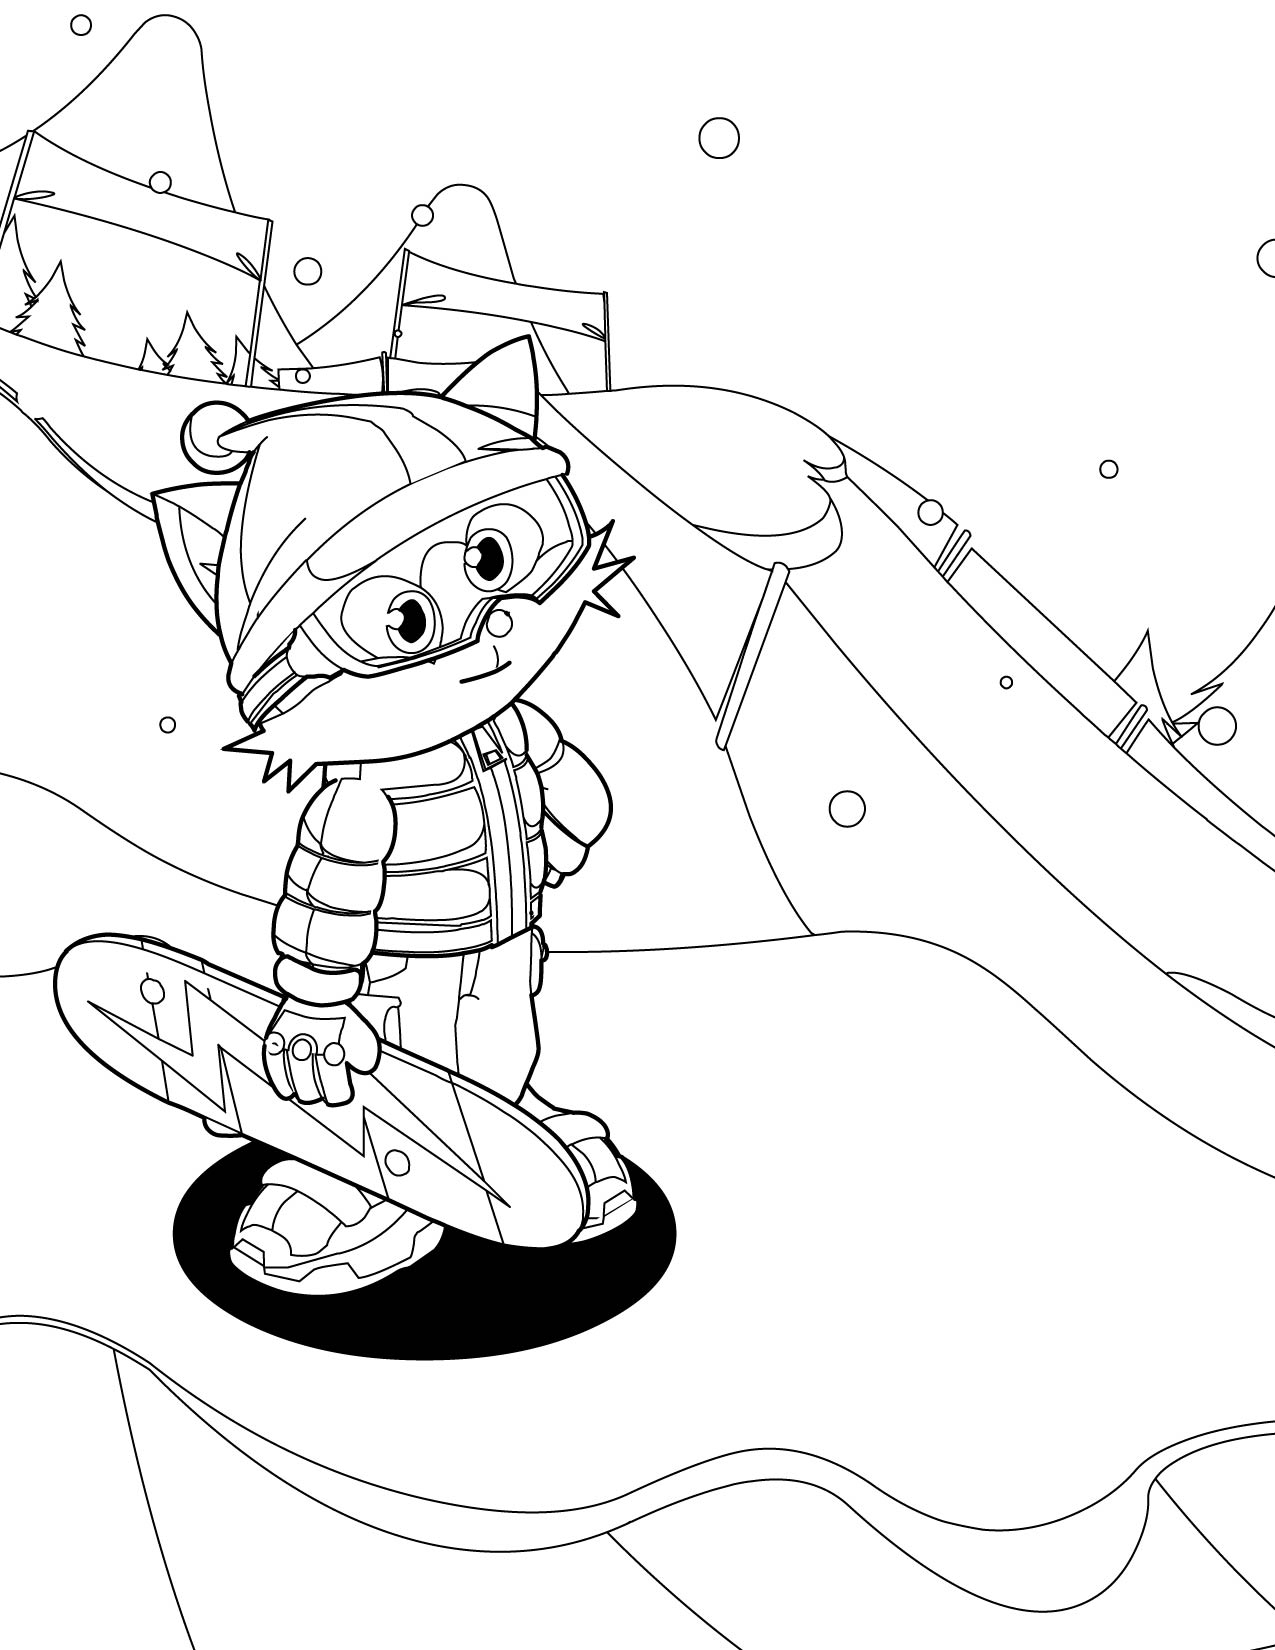 cartoon snowboarding coloring pages